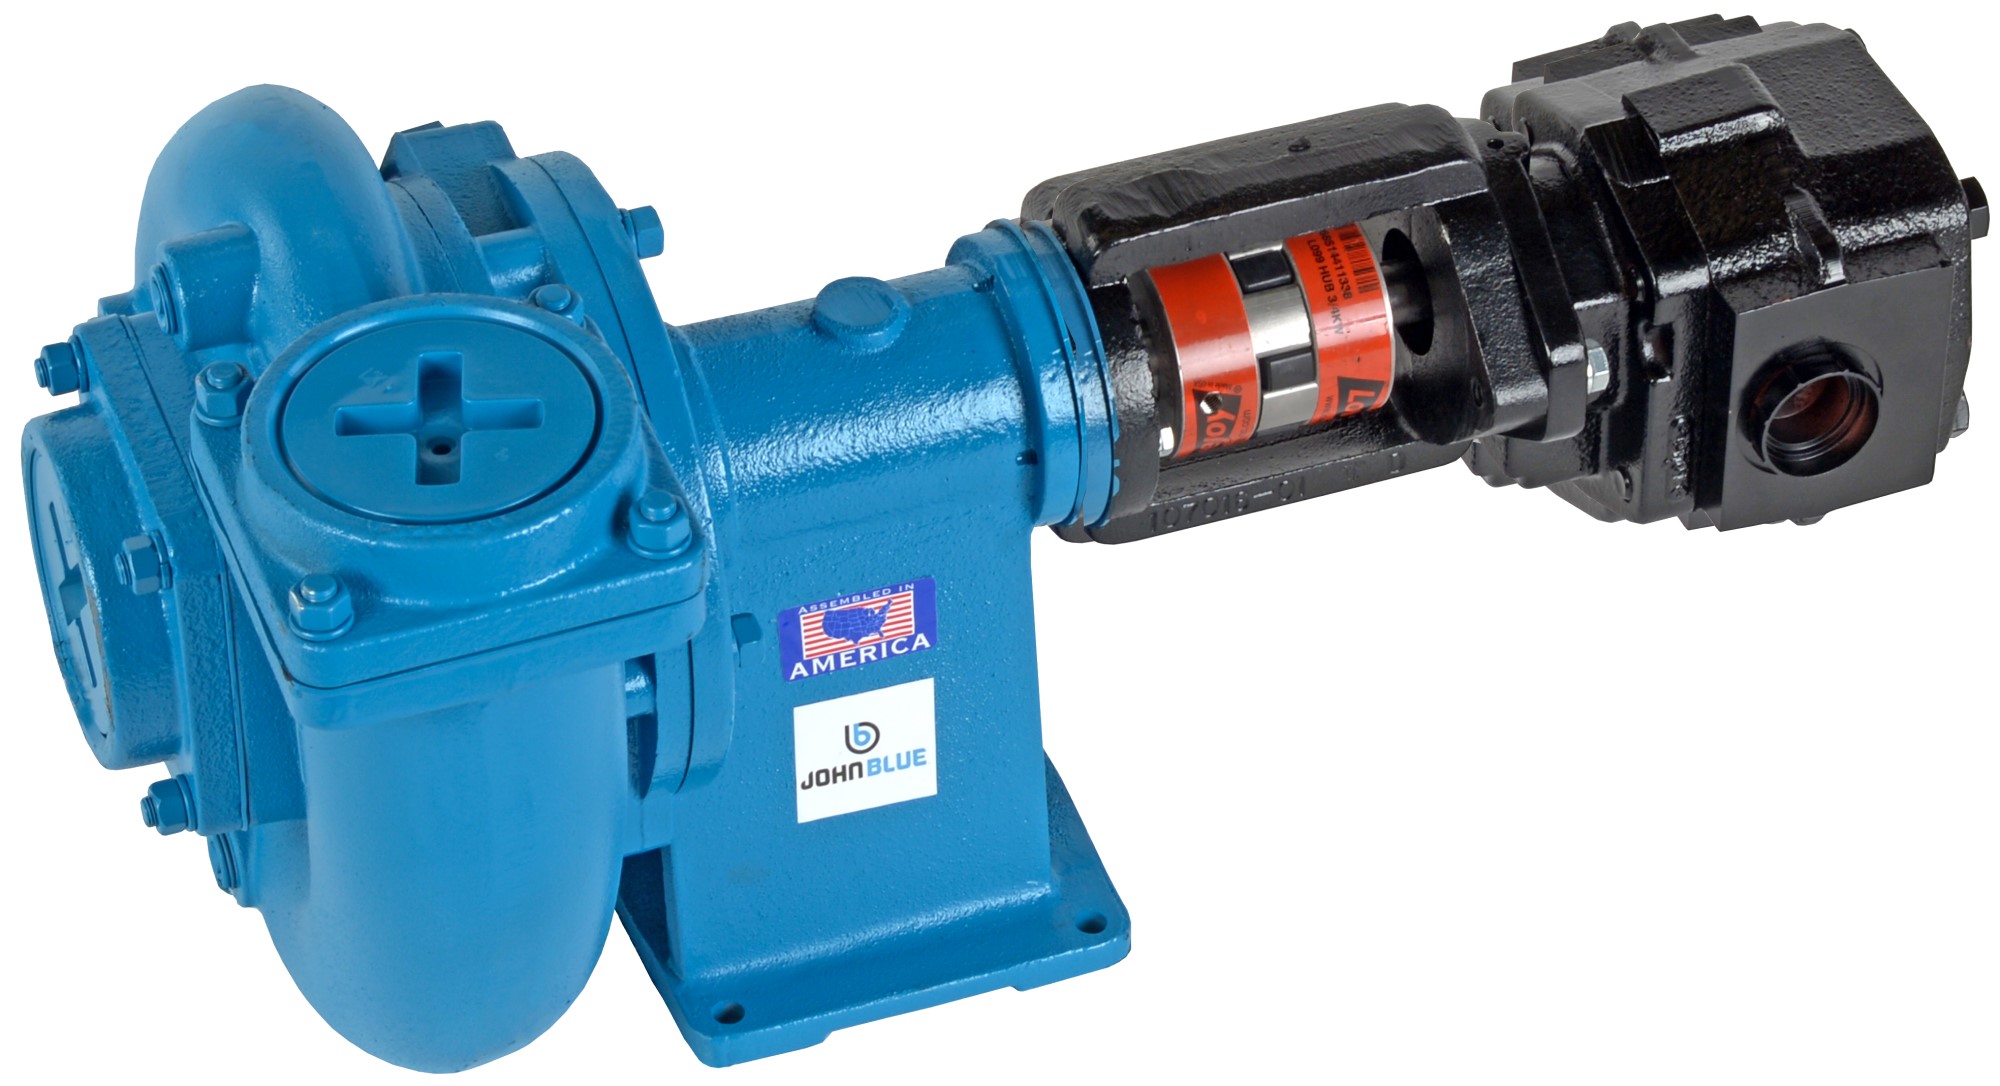 Picture of "Vac-U-Double Seal" Straight Centrifugal Pump, Cast Iron, with Hydraulic Drive, 3", 365 MAX GPM, 310 GPM @ 25 PSI, 22-25 GPM Oil Req'd